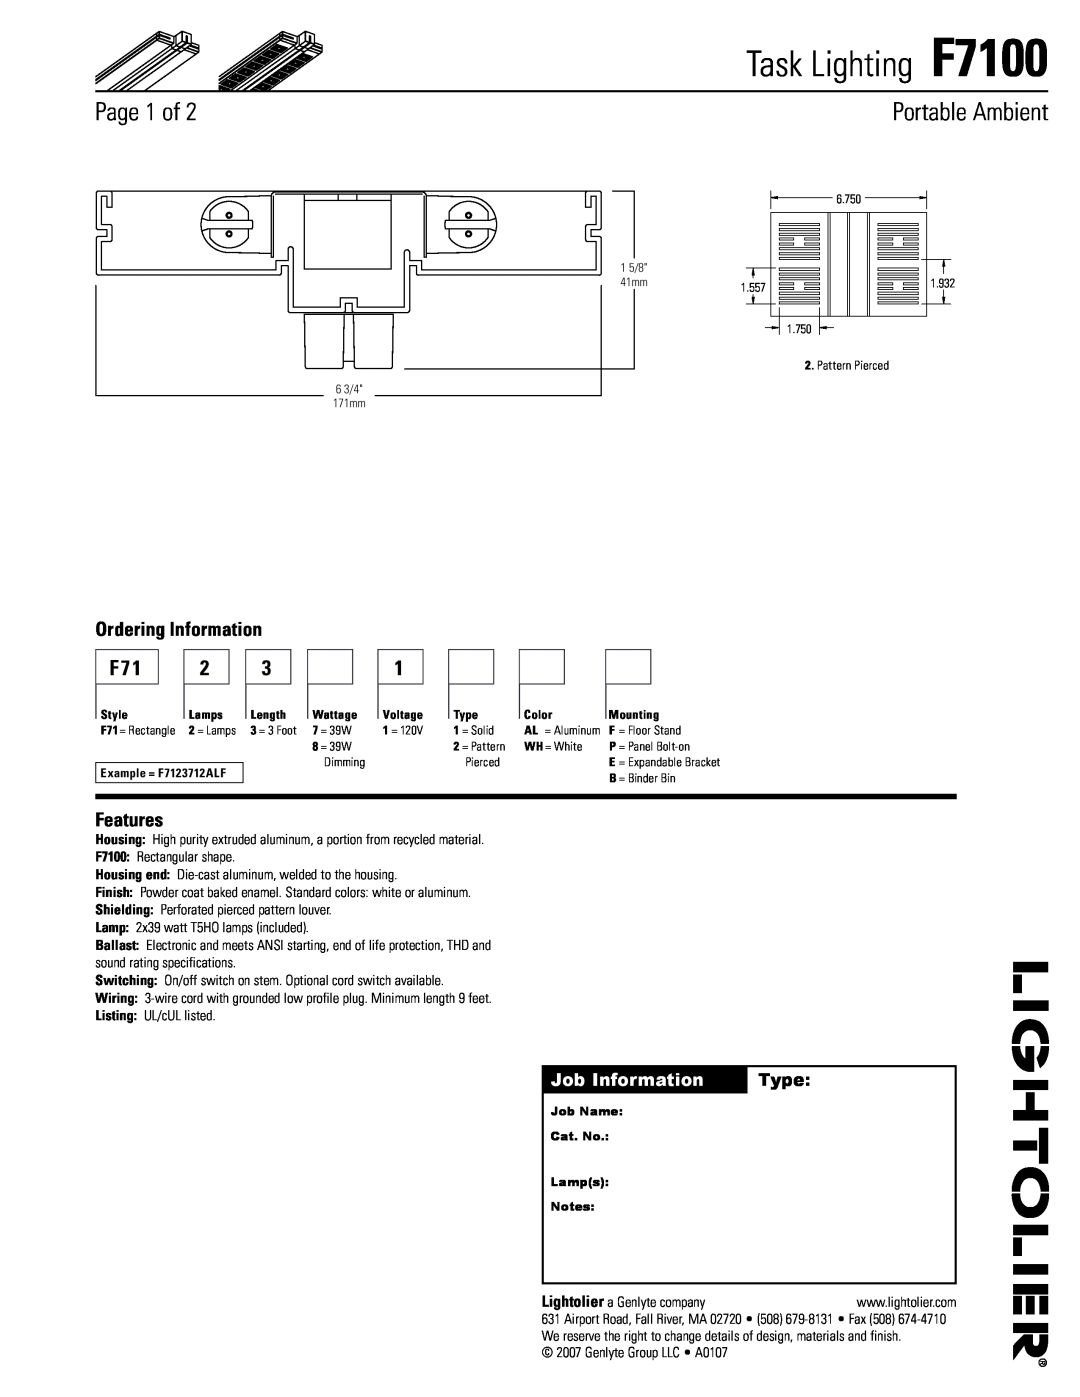 Lightolier specifications Page of, Portable Ambient, Job Information, Type, Task Lighting F7100, Ordering Information 